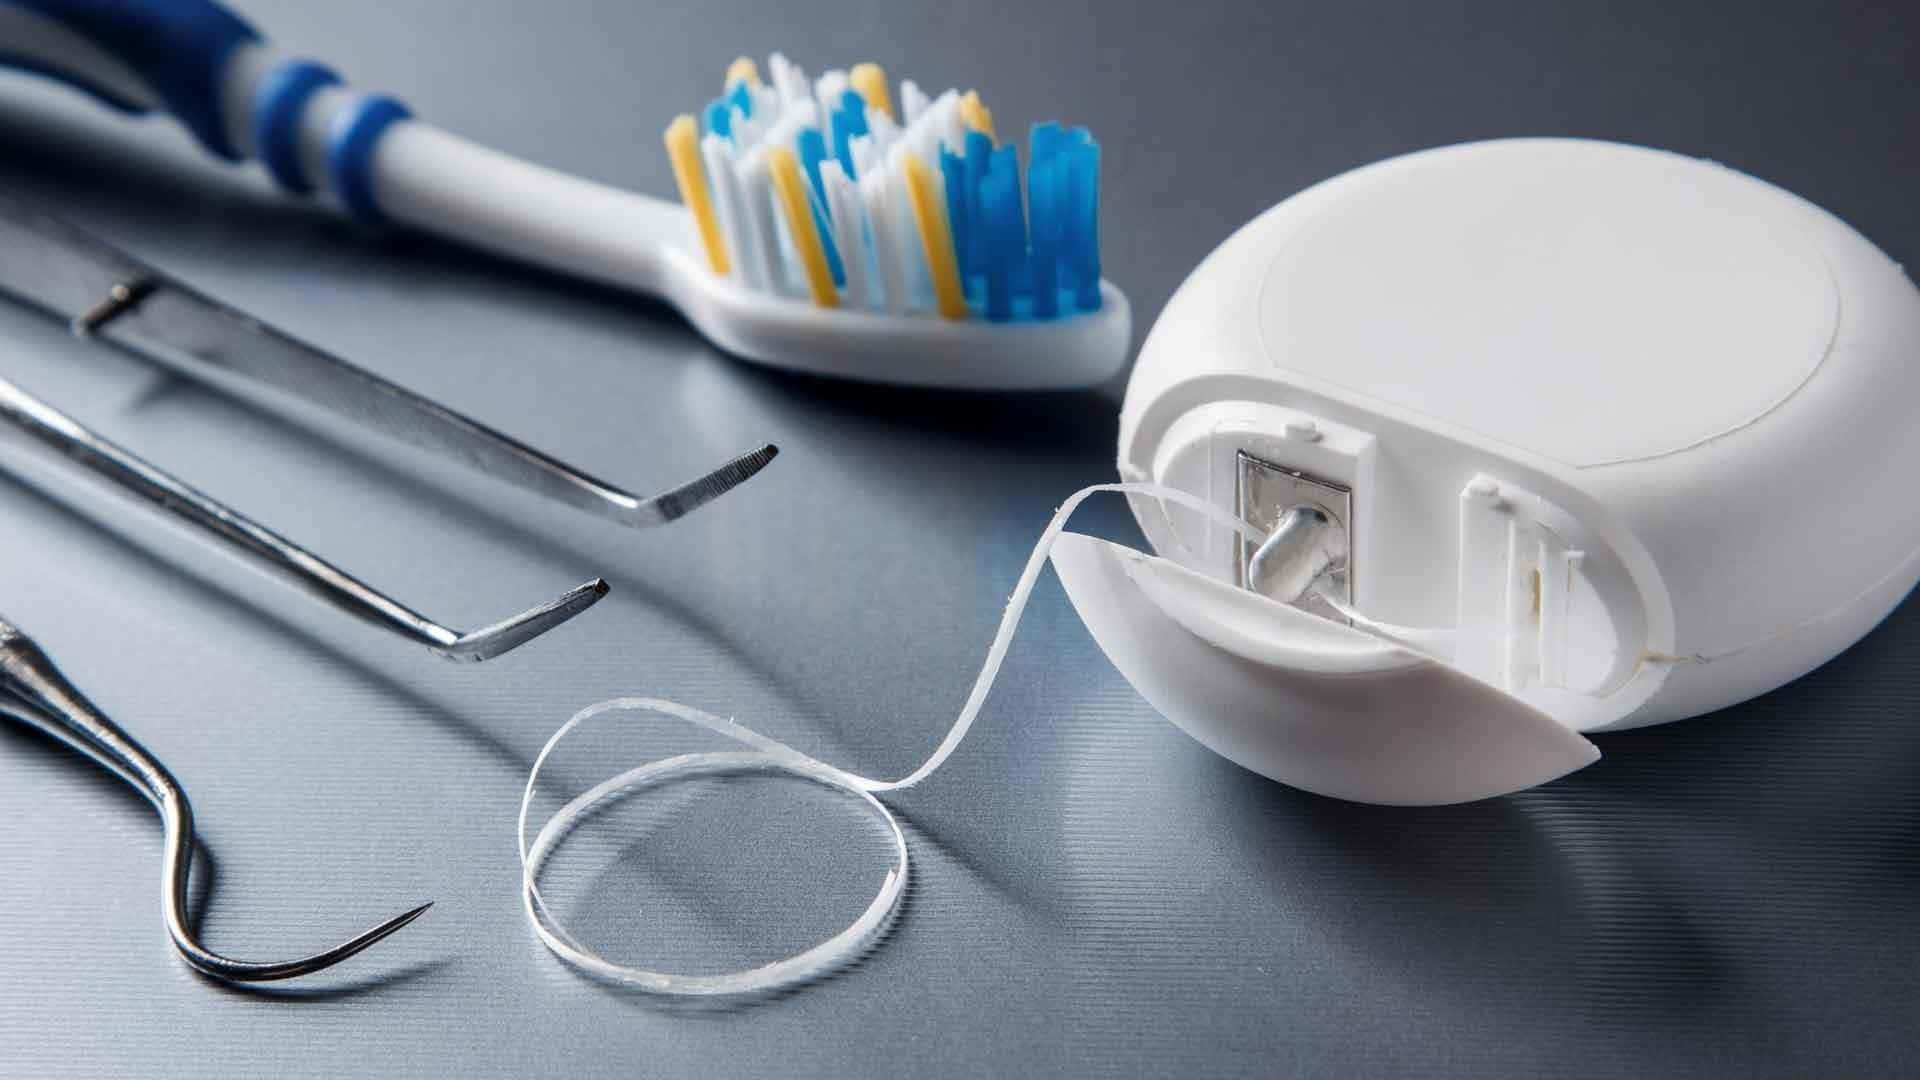 A Toothbrush, Toothpaste, And Other Dental Tools